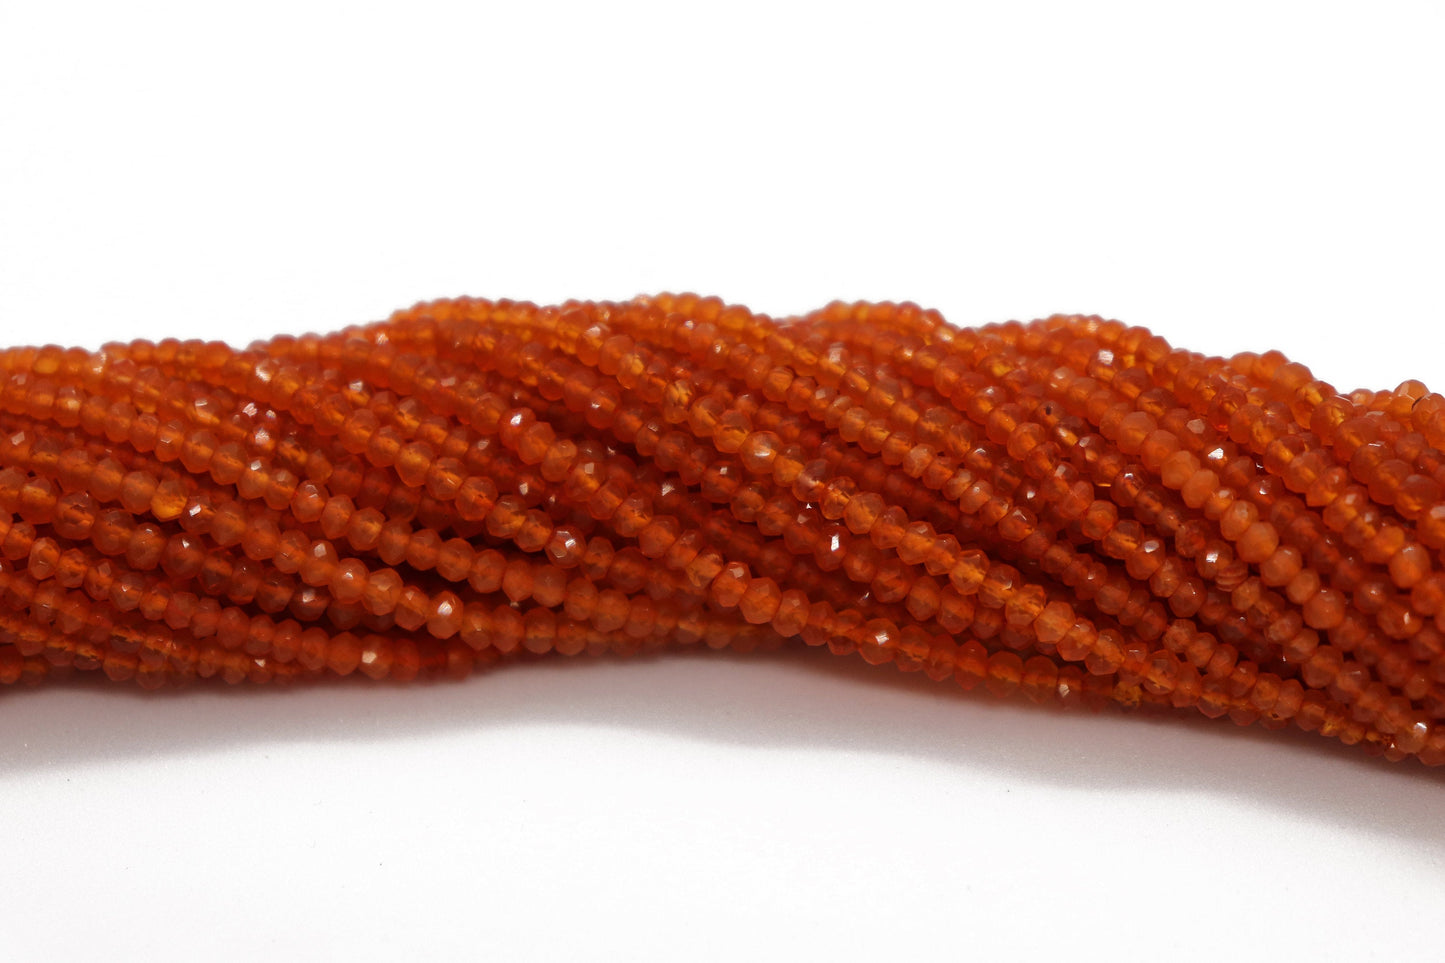 Carnelian Rondelle Beads Faceted, 3mm-4mm Size, Finest Quality Jewelry supplies, crafting supplies and beading supplies, Gemstone beads Beadsforyourjewelry